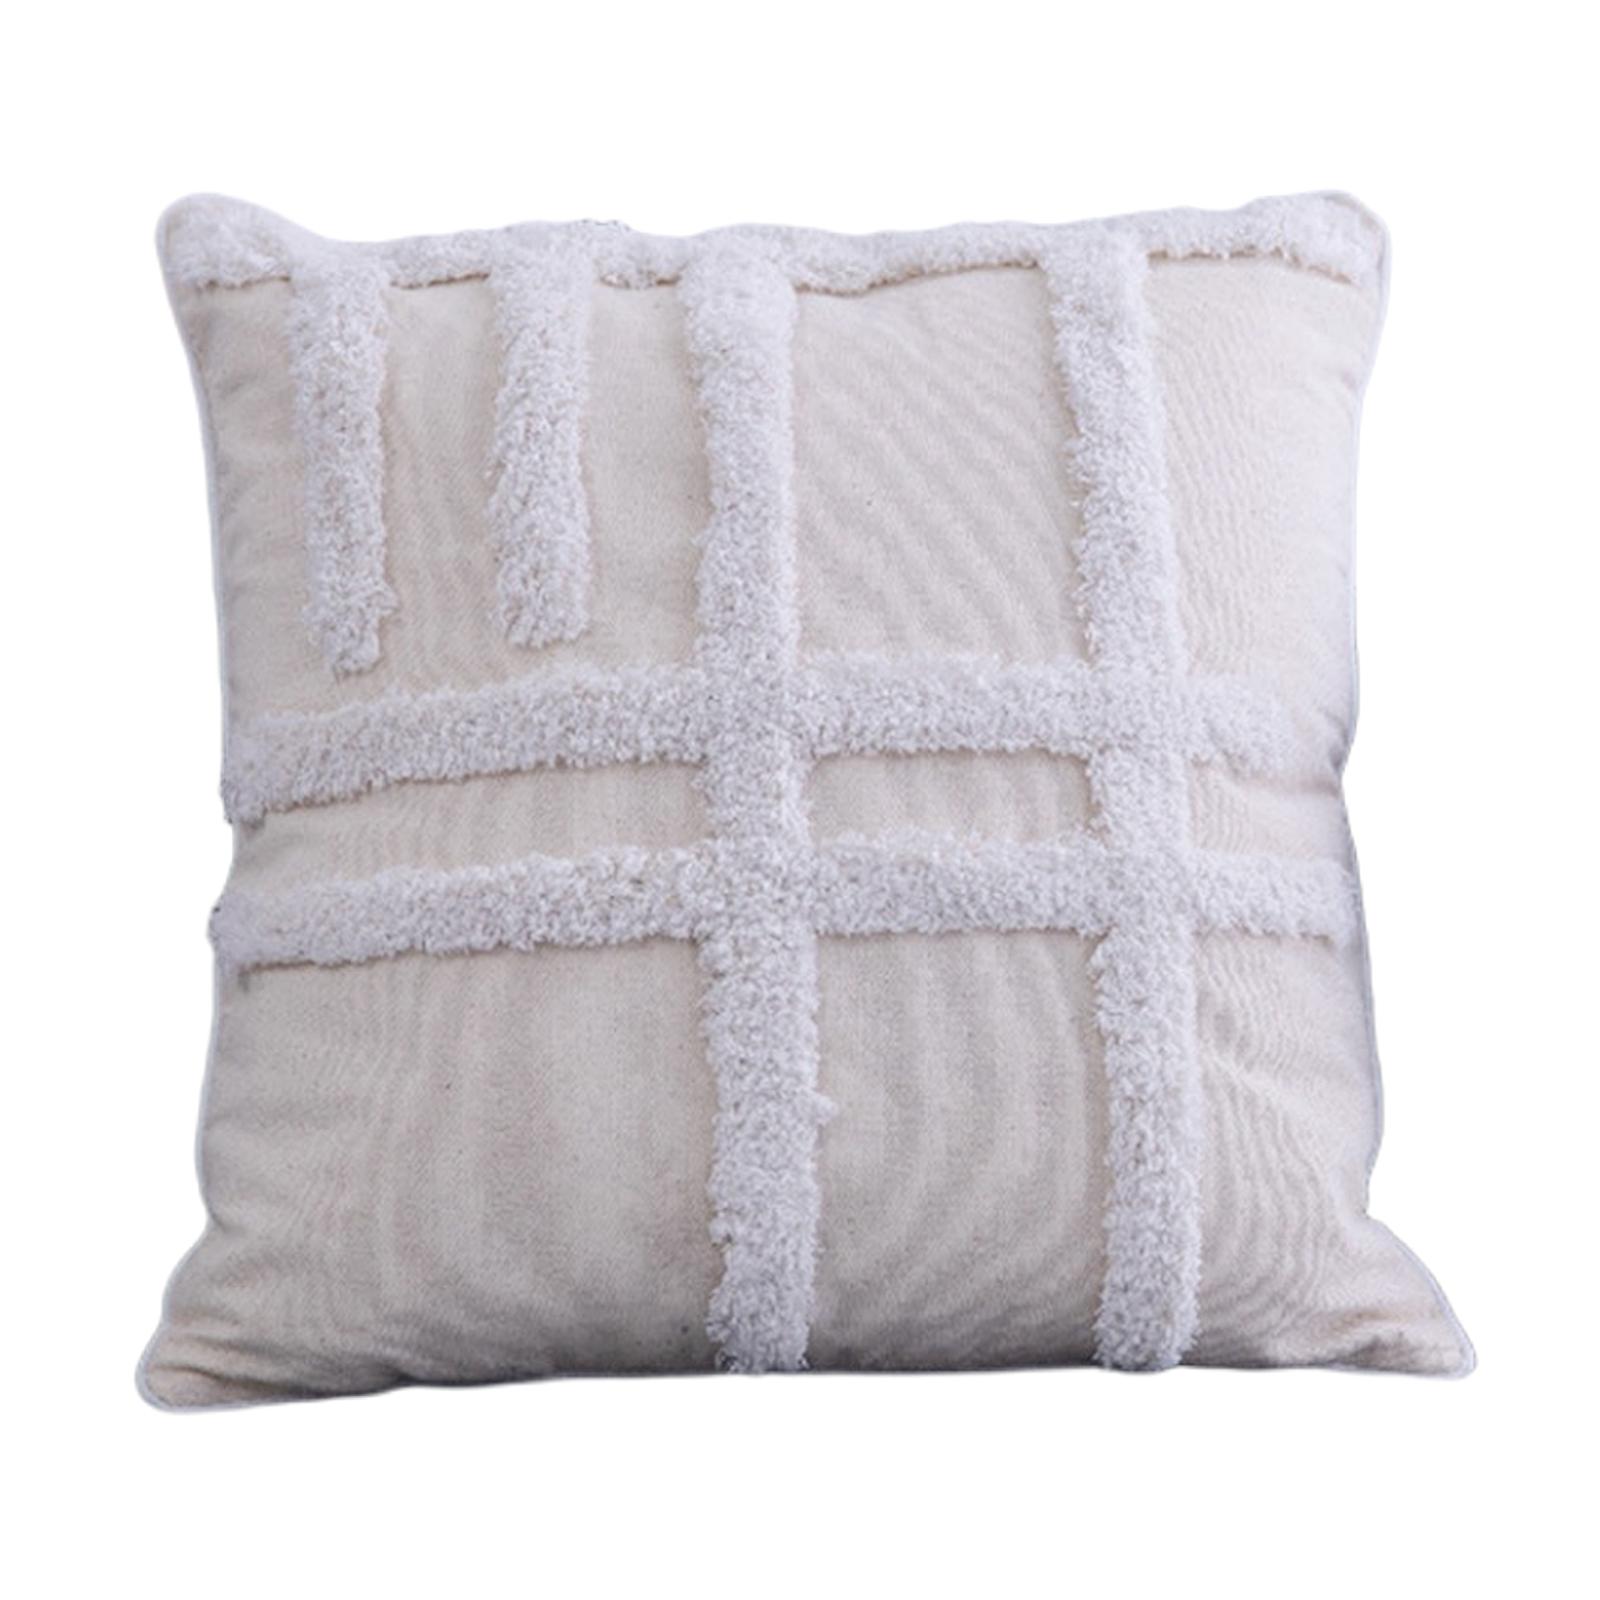 Throw Pillow Cover Tassels Woven Tufted Cushion Cover for Bed 45x45cm E